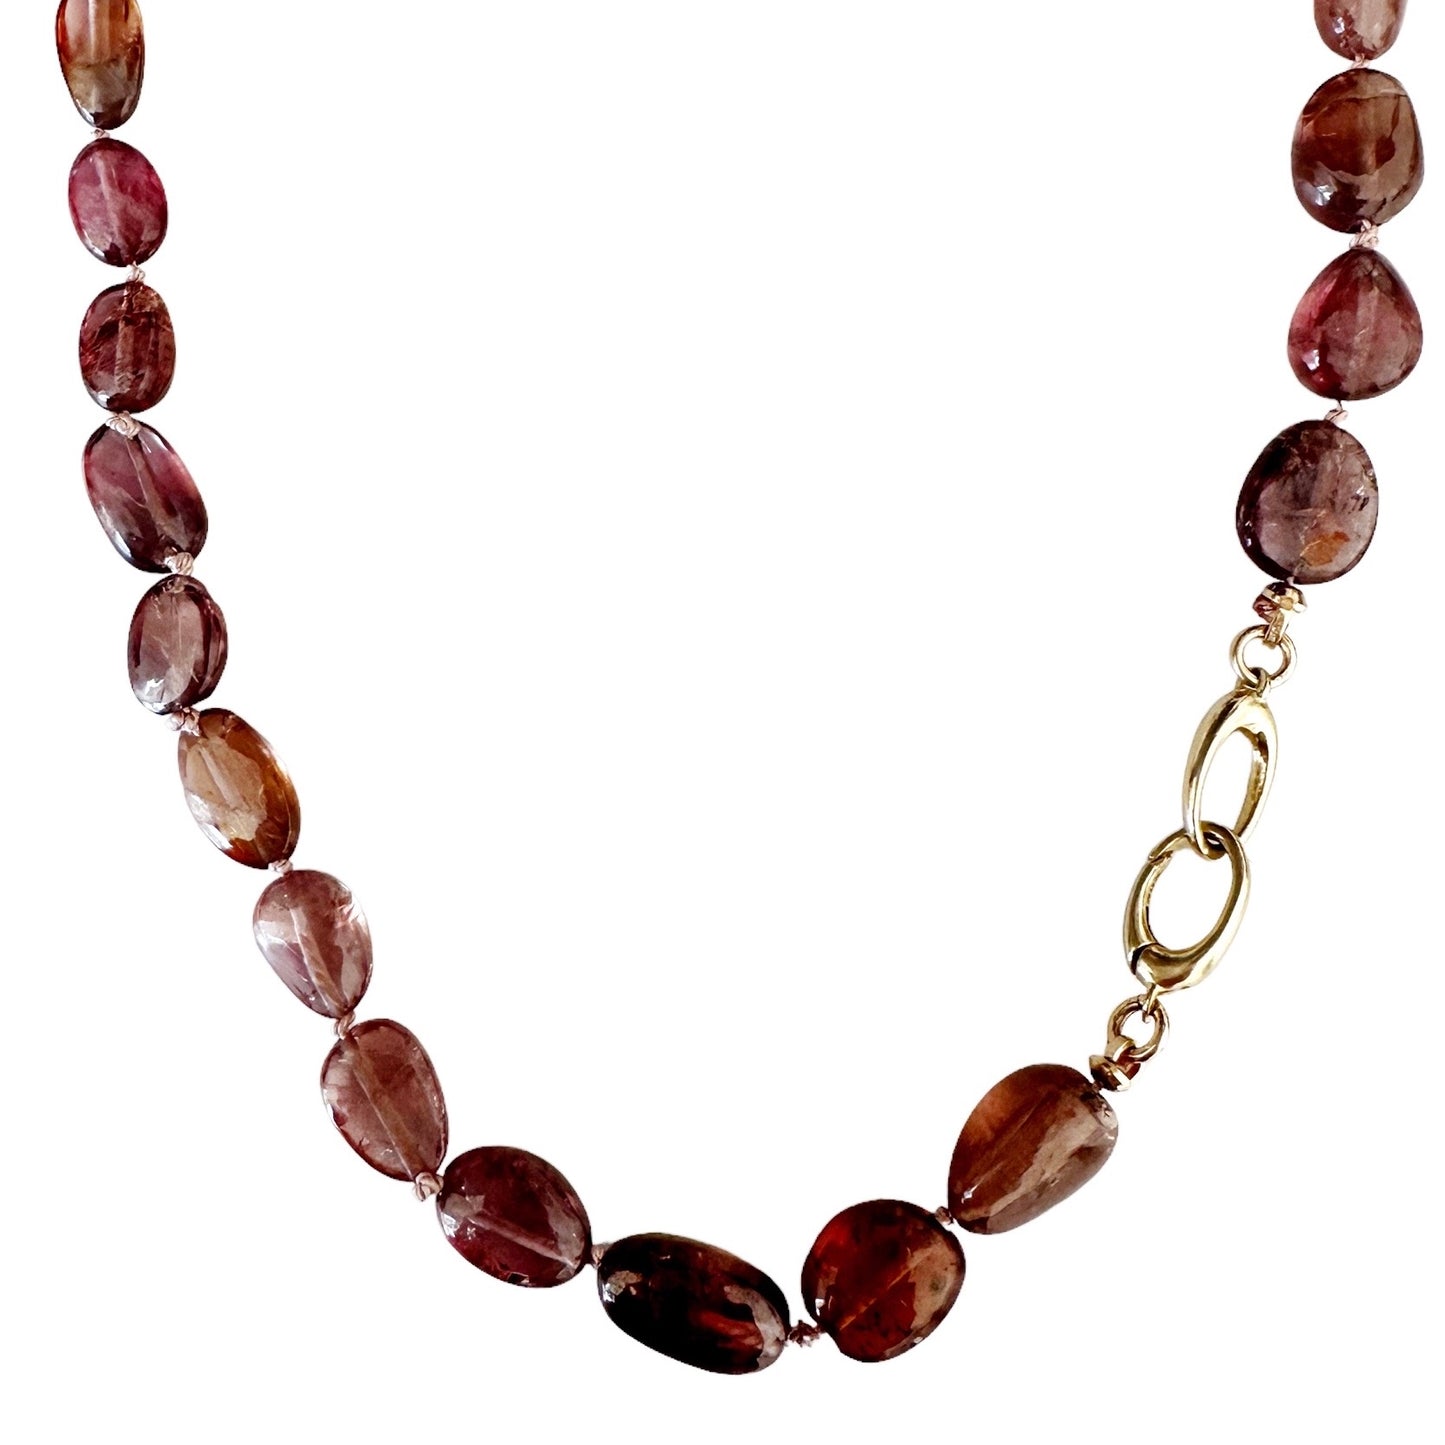 17” Gorgeous and rare Andesine Garnet hand knotted oval gemstone necklace with 14K gold double clasp   Available with clasp options   Wear alone or mix with your favorite neck stack    